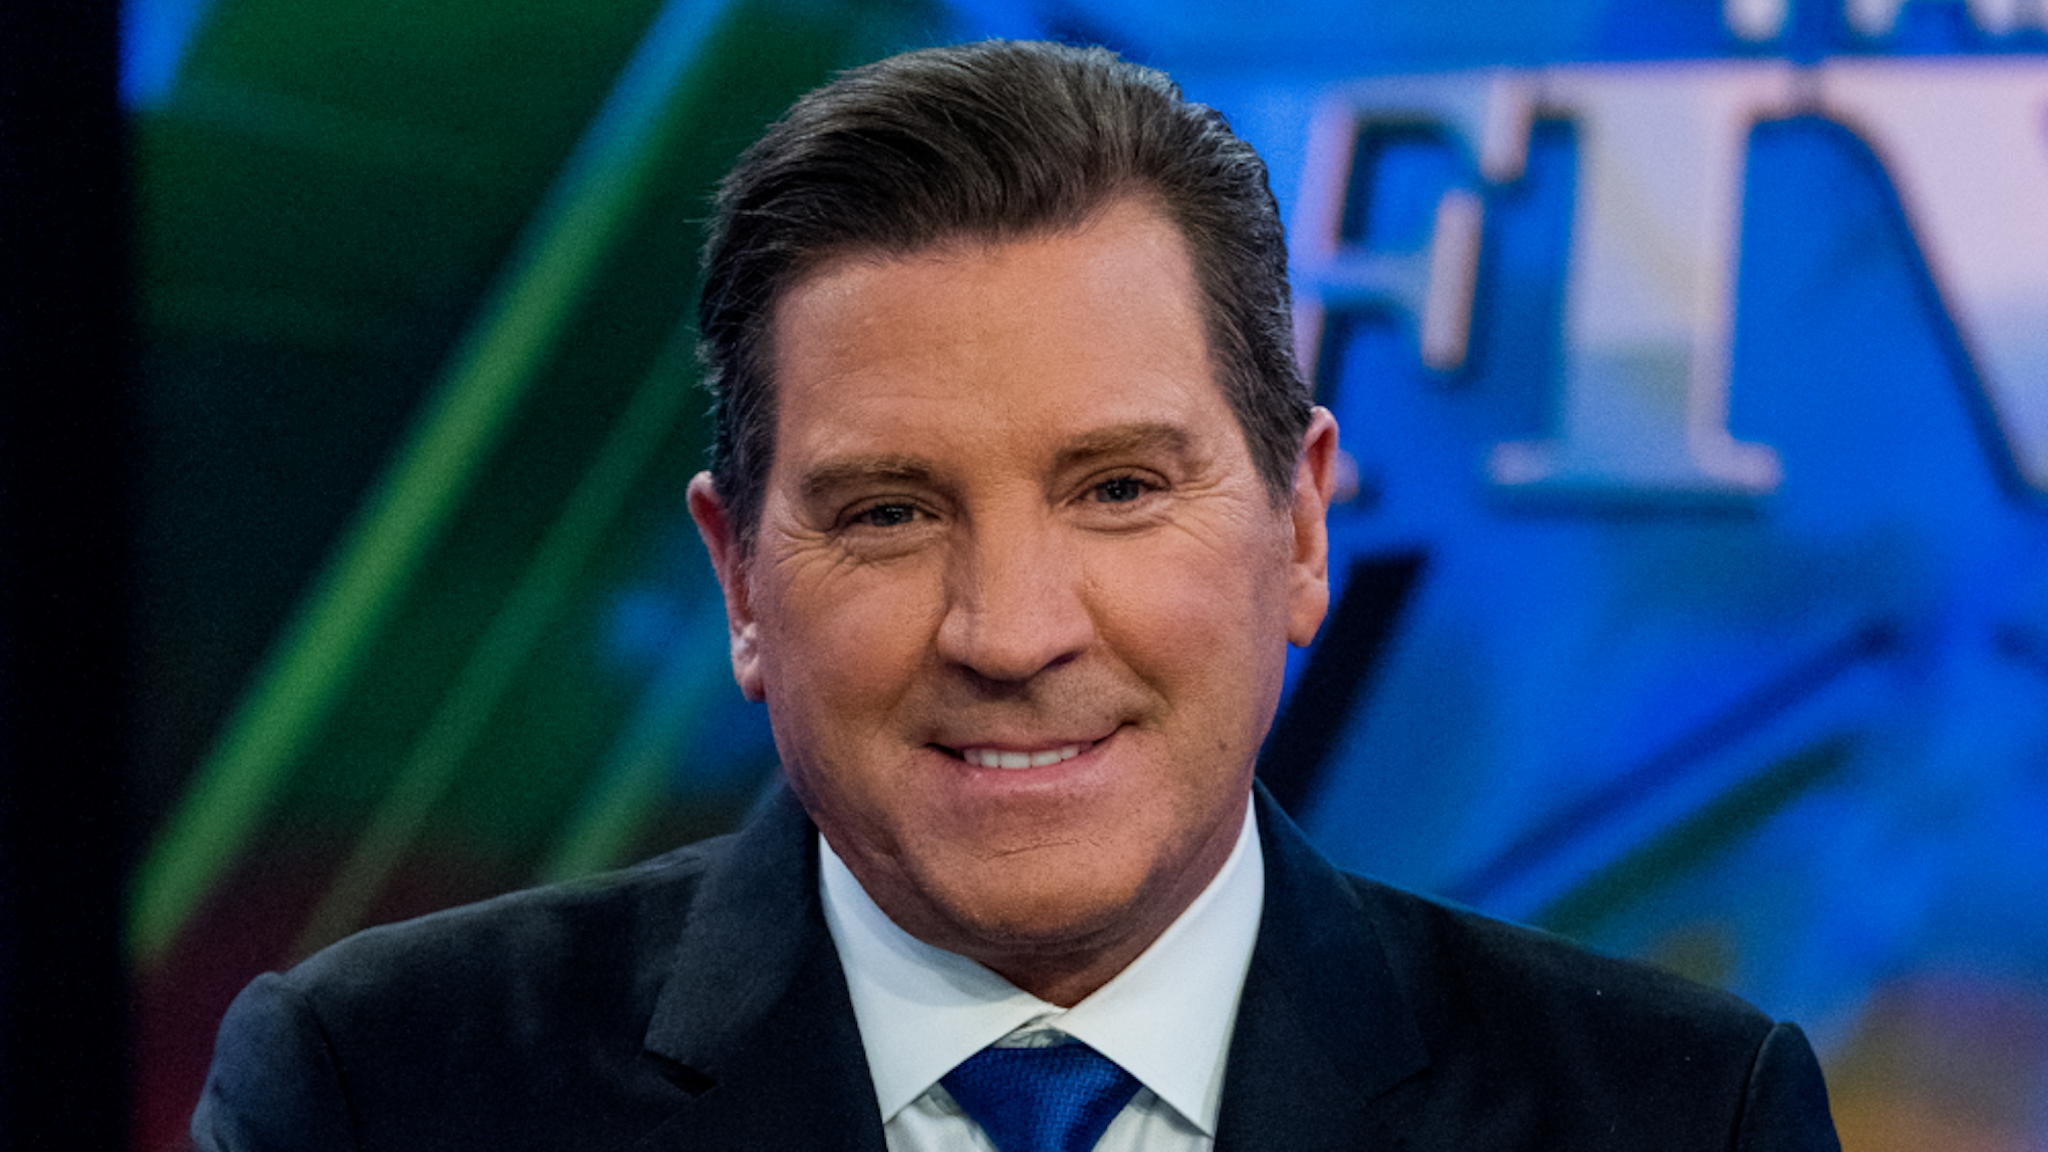 NEW YORK, NY - JANUARY 17: Fox Host Eric Bolling sits on the panel of Fox News Channel's "The Five" as pundit Bob Beckel rejoins the show at FOX Studios on January 17, 2017 in New York City.